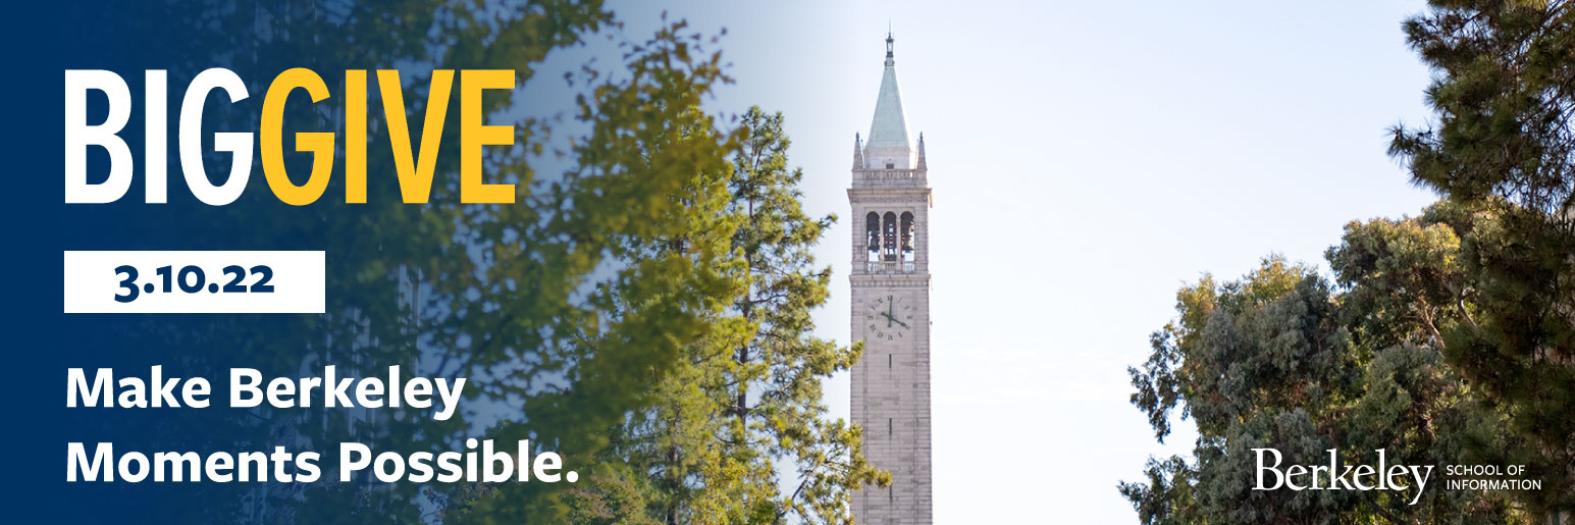 Image of the campanile tower at Berkeley with text "Big Give / Make Berkeley Moments Possible"